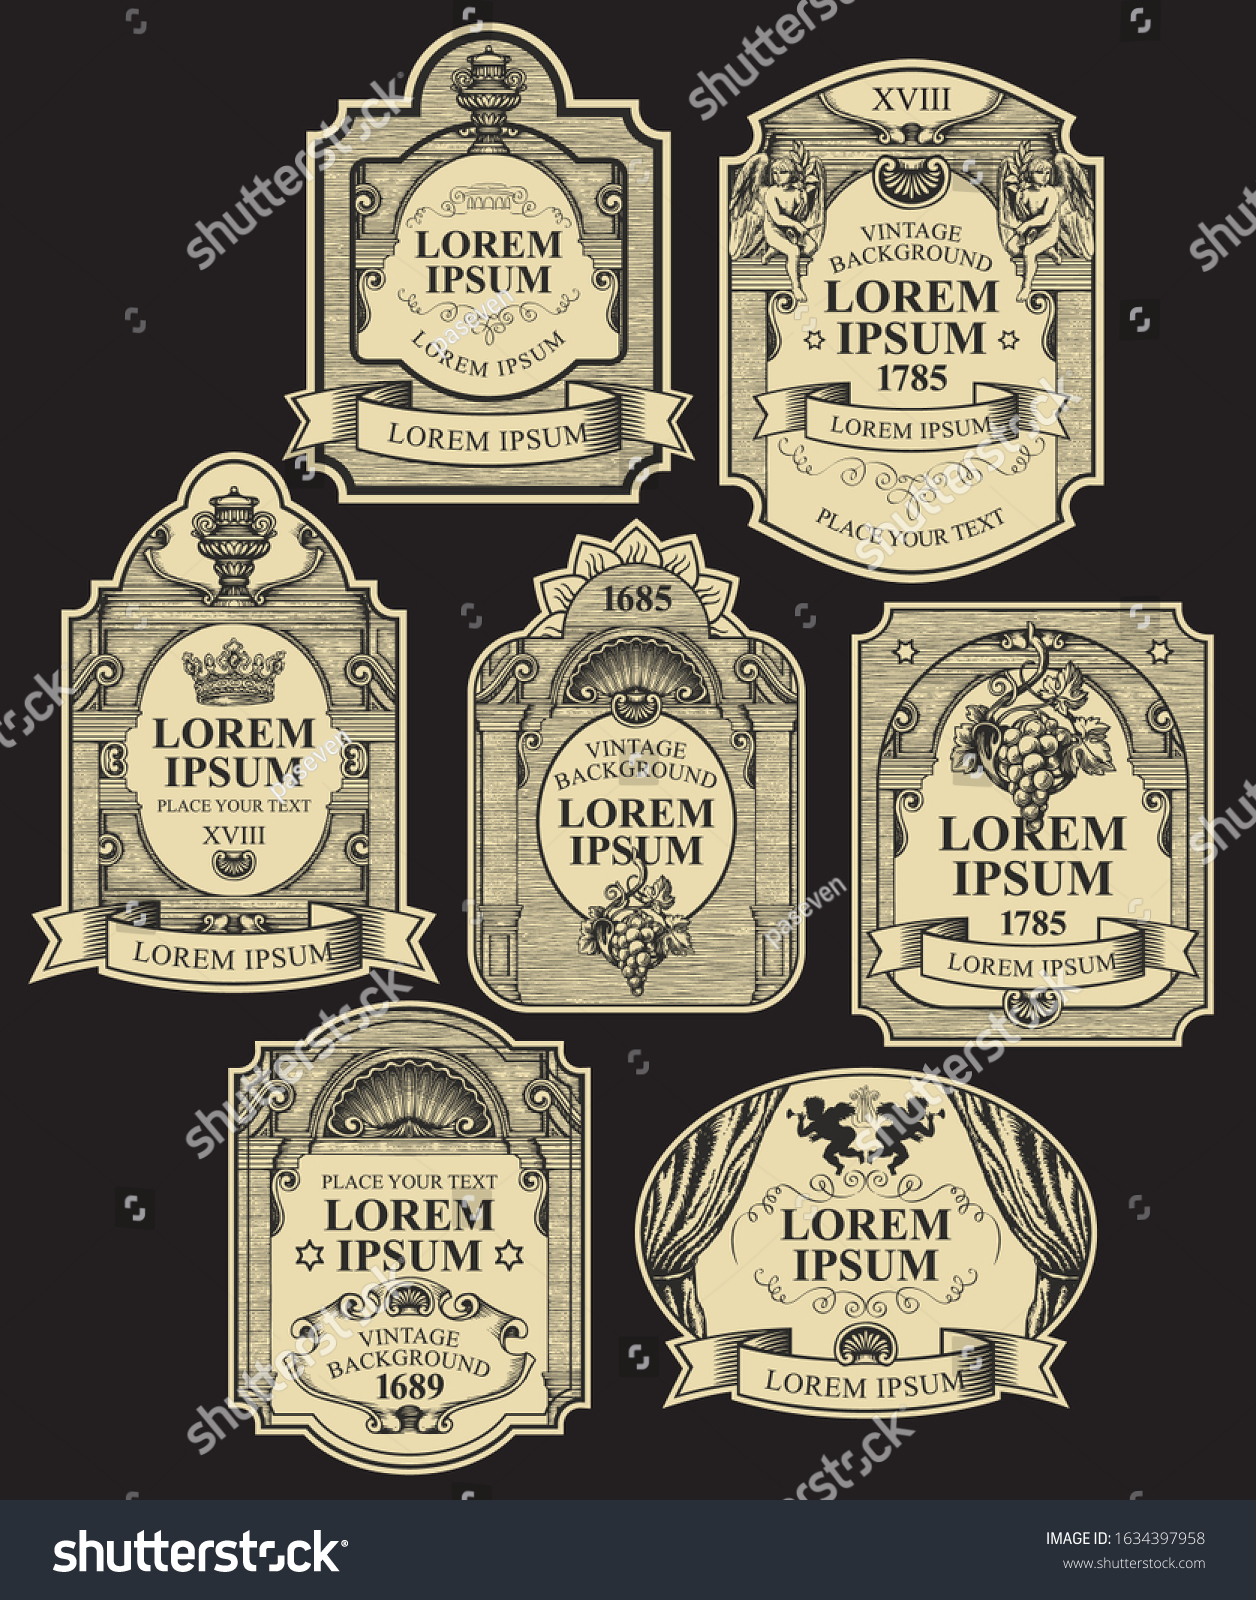 SVG of Vector set of ornate hand-drawn labels on the black background. Collection of vintage labels decorated by ribbons, crowns, angels, curls in figured frames with place for text and logo svg